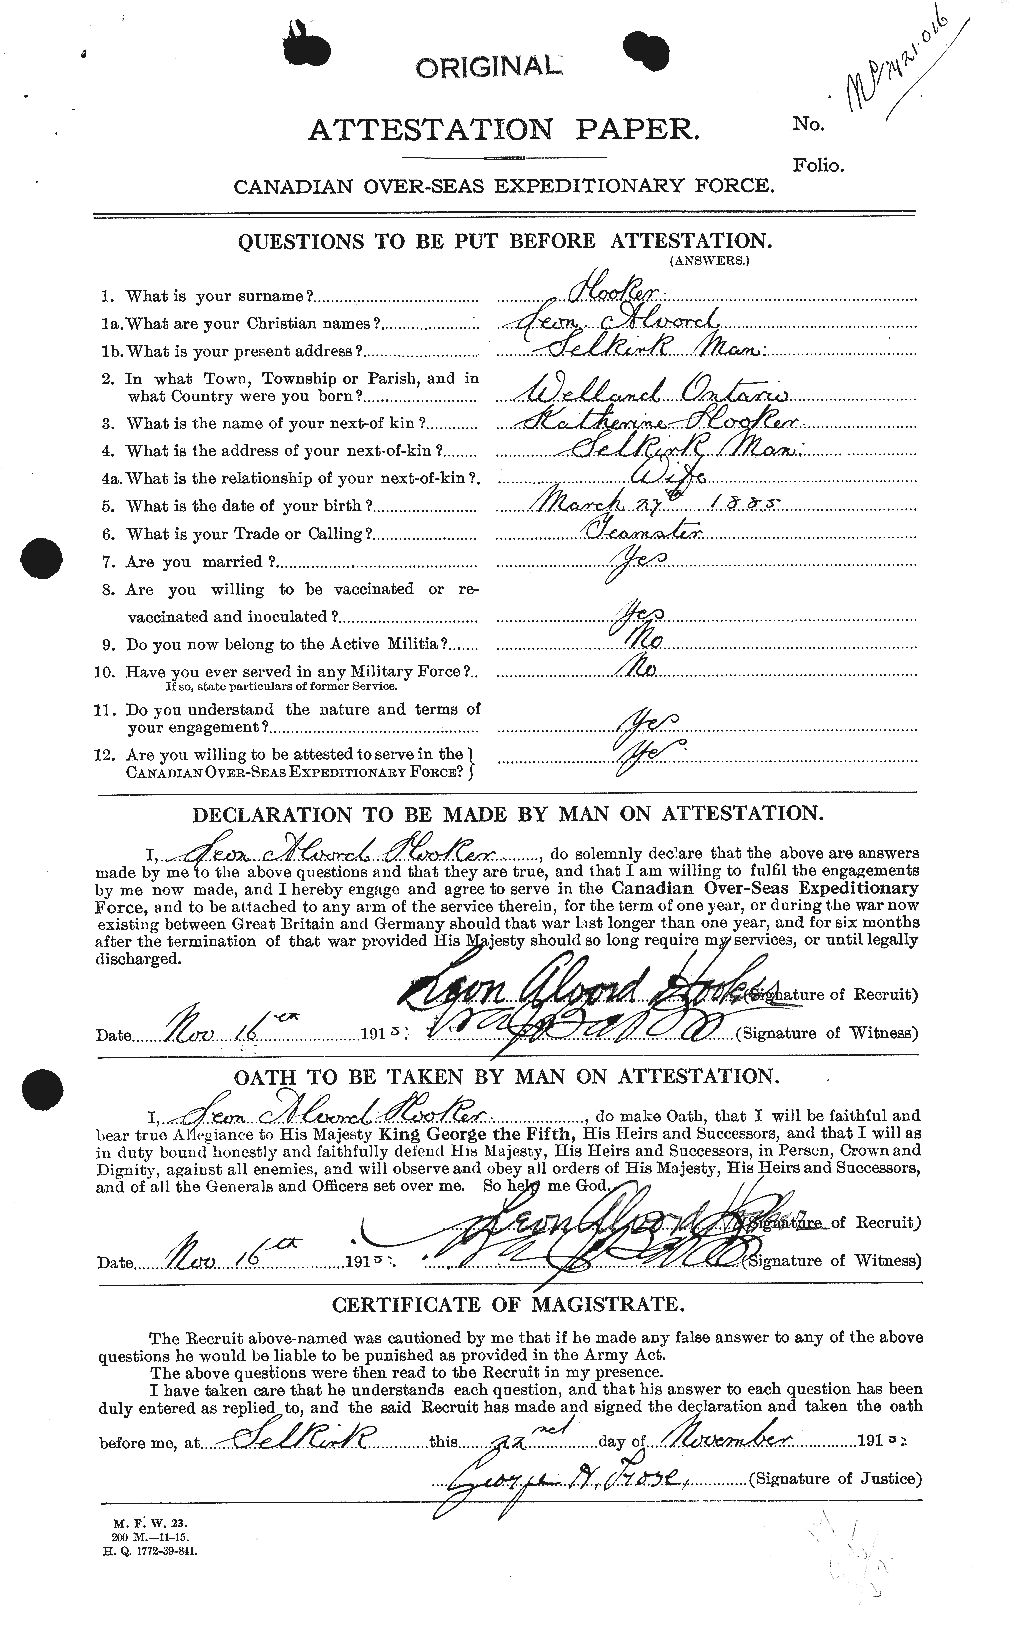 Personnel Records of the First World War - CEF 398184a